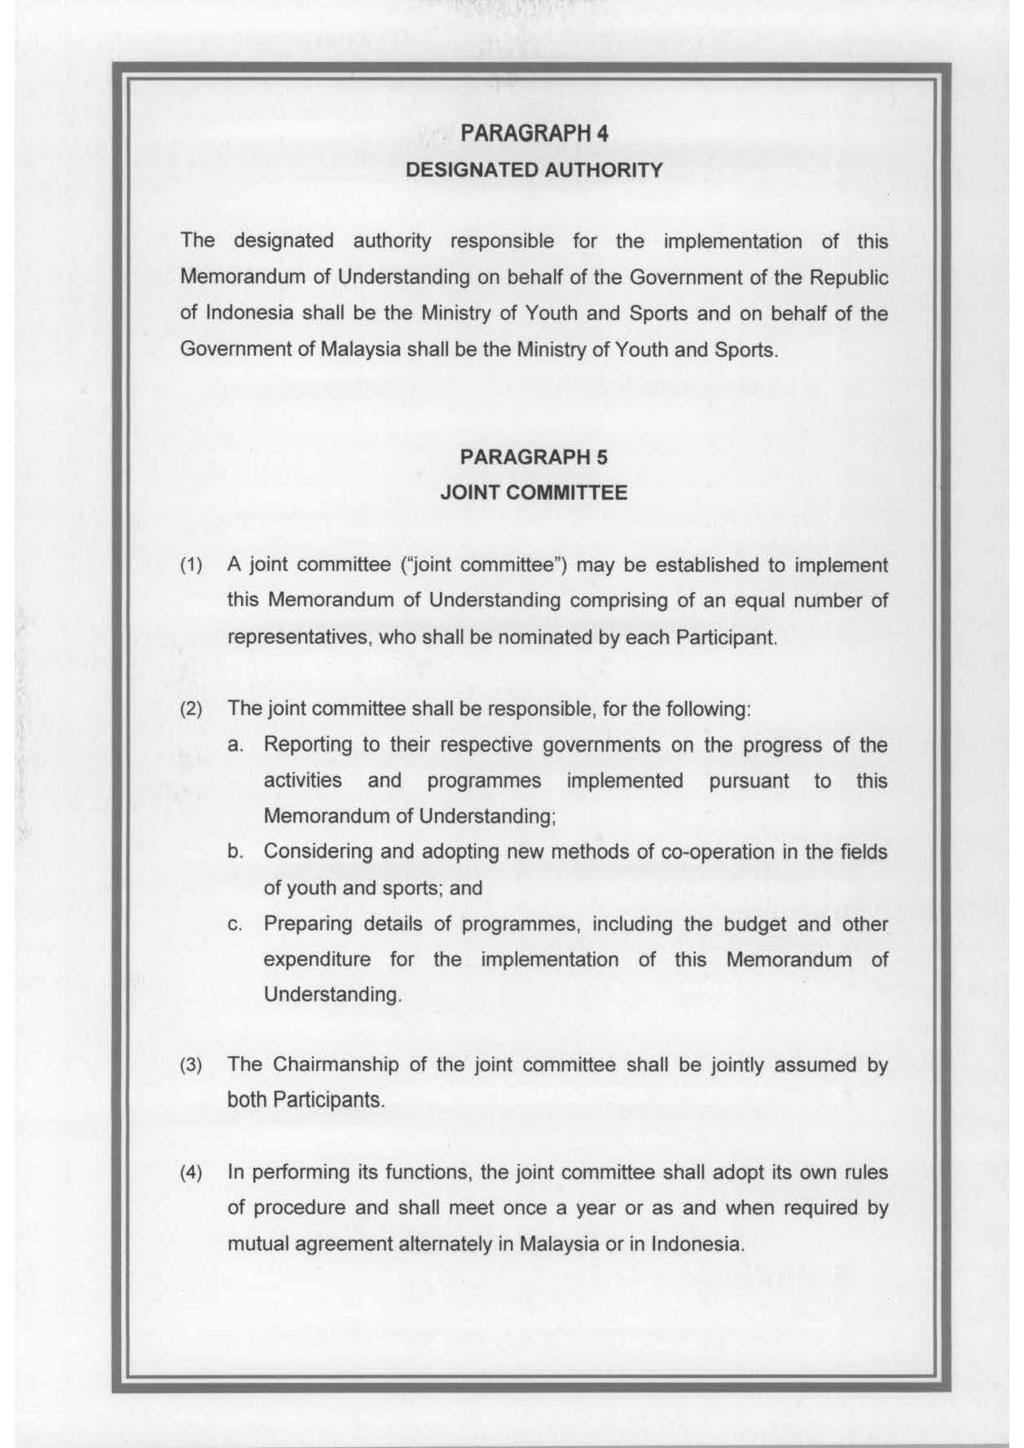 PARAGRAPH 4 DESIGNATED AUTHORITY The designated authority responsible for the implementation of this Memorandum of Understanding on behalf of the Government of the Republic of Indonesia shall be the